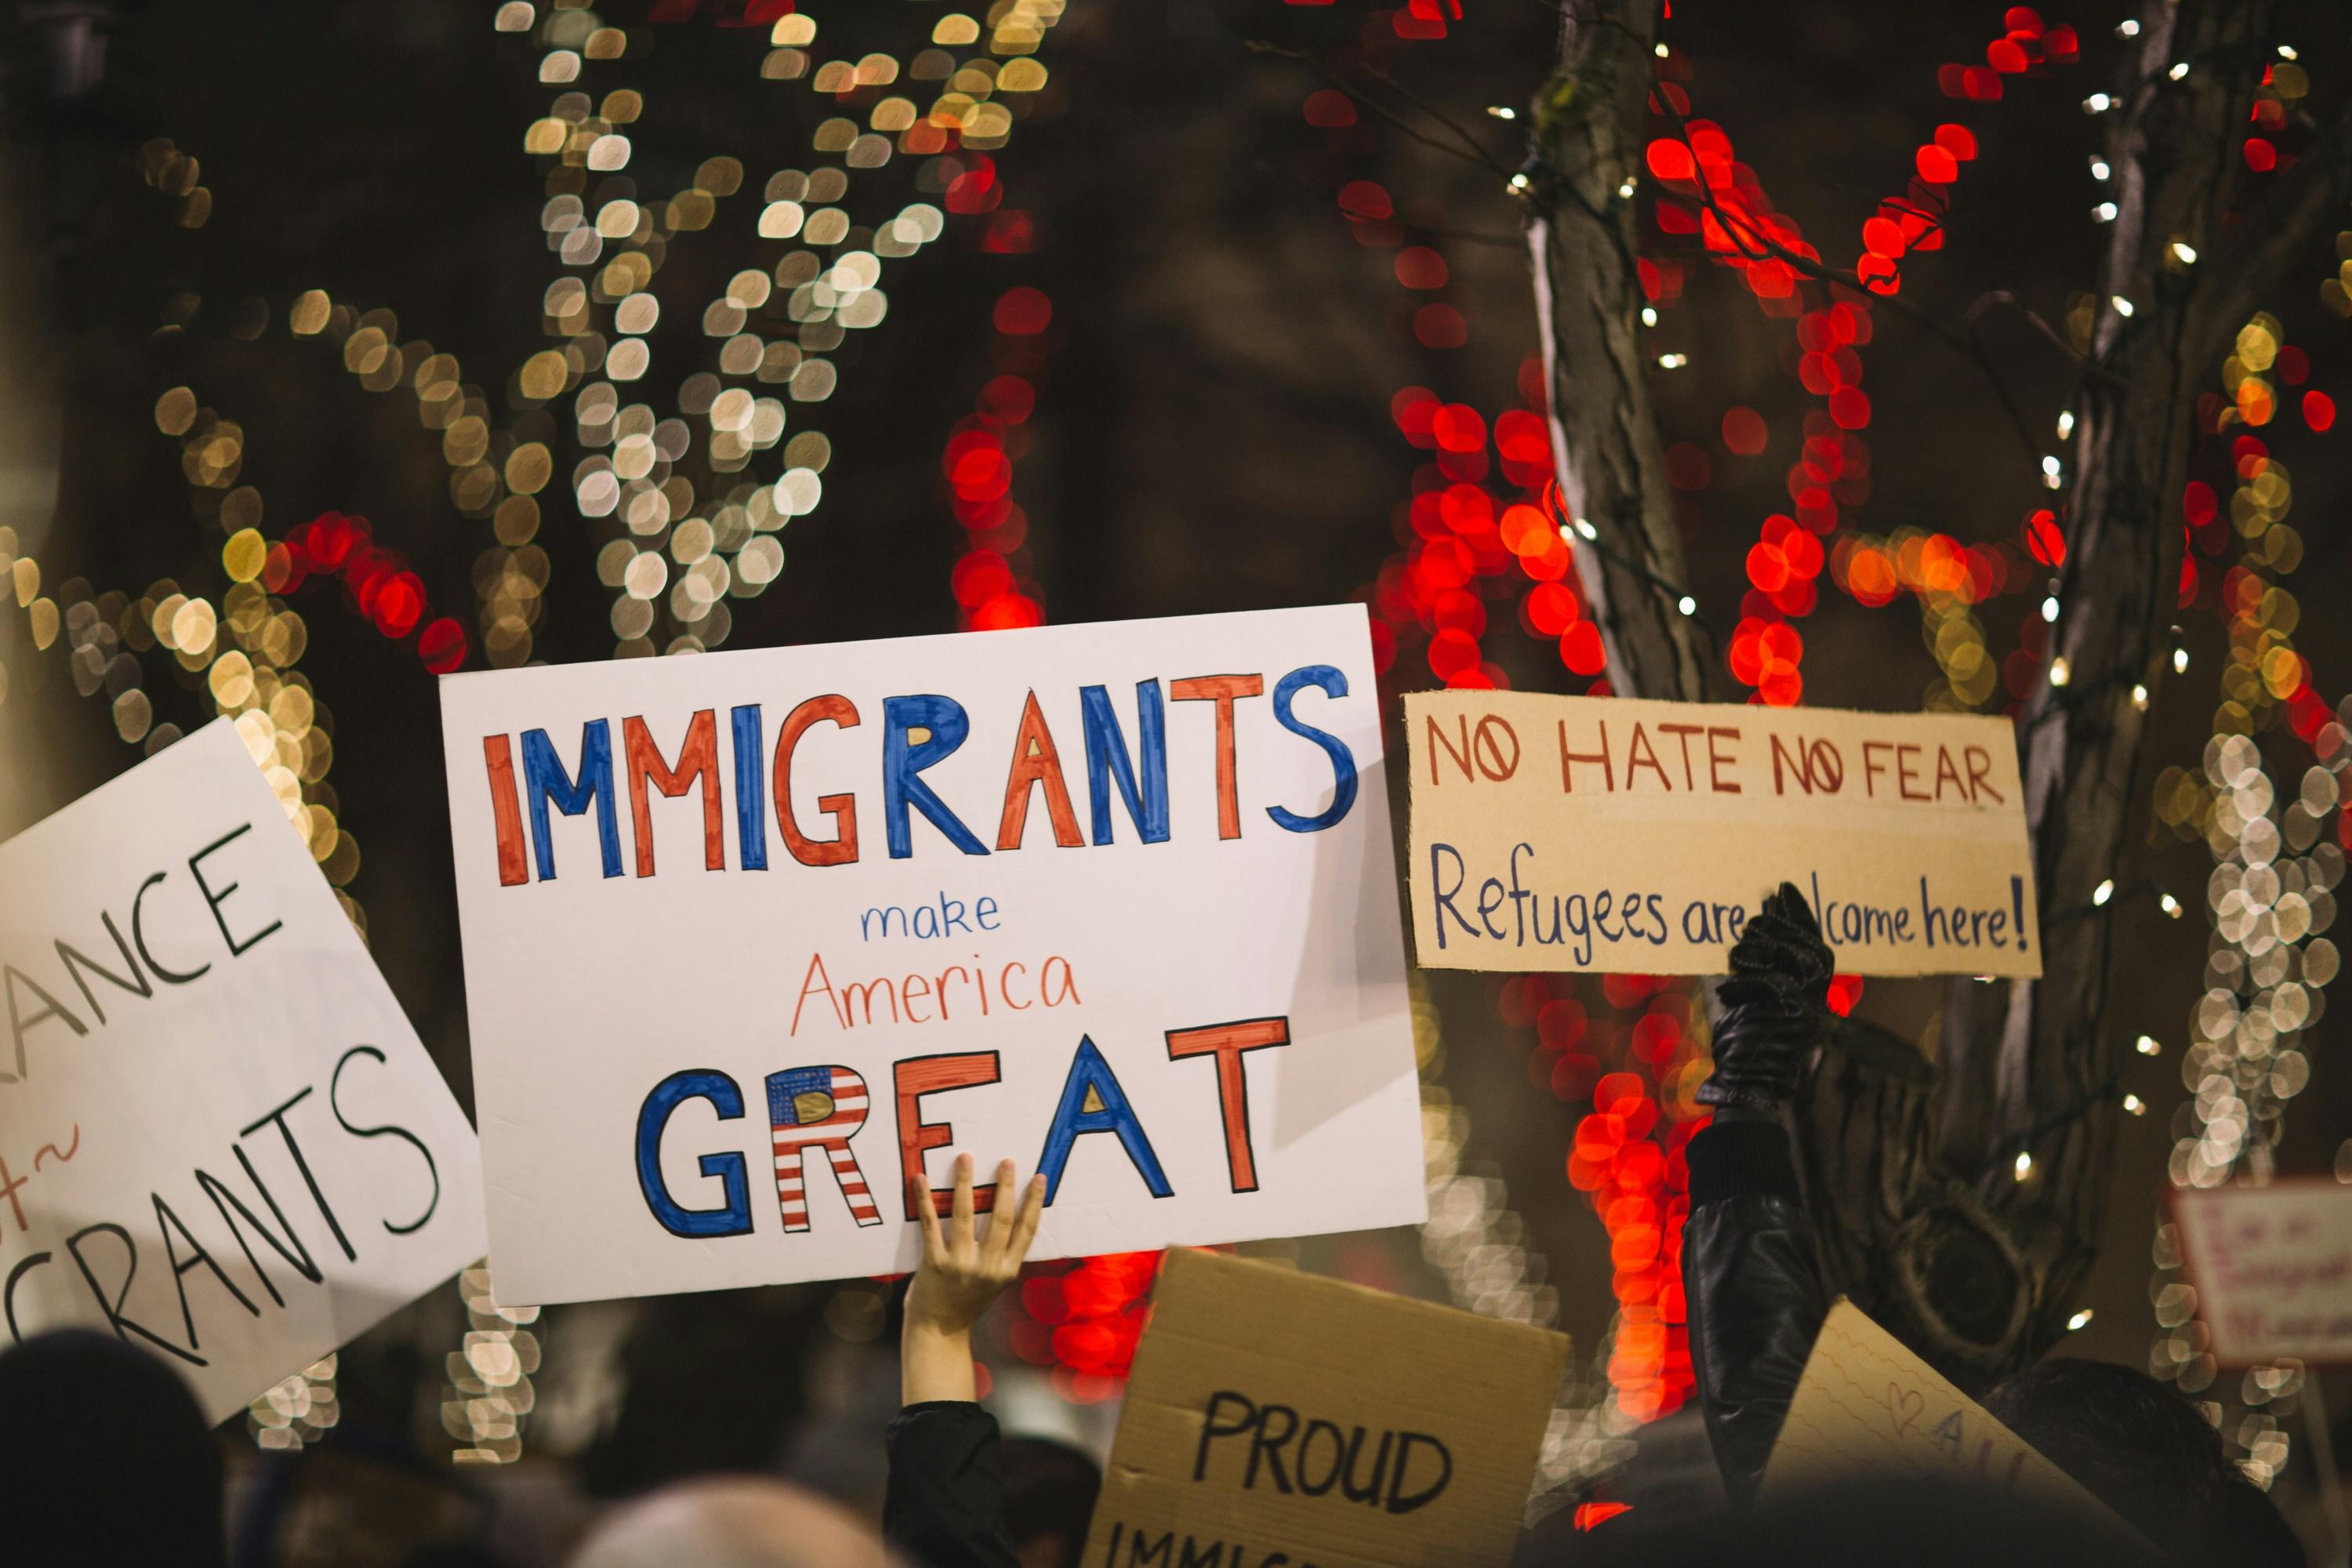 Group of protestors holding up signs protesting American immigration and border policies. Sign in middle says "Immigrants make America GREAT" in red and blue letters, and sign on the right says "NO HATE NO FEAR" on the first line and "Refugees are welcome here" on the second line. 